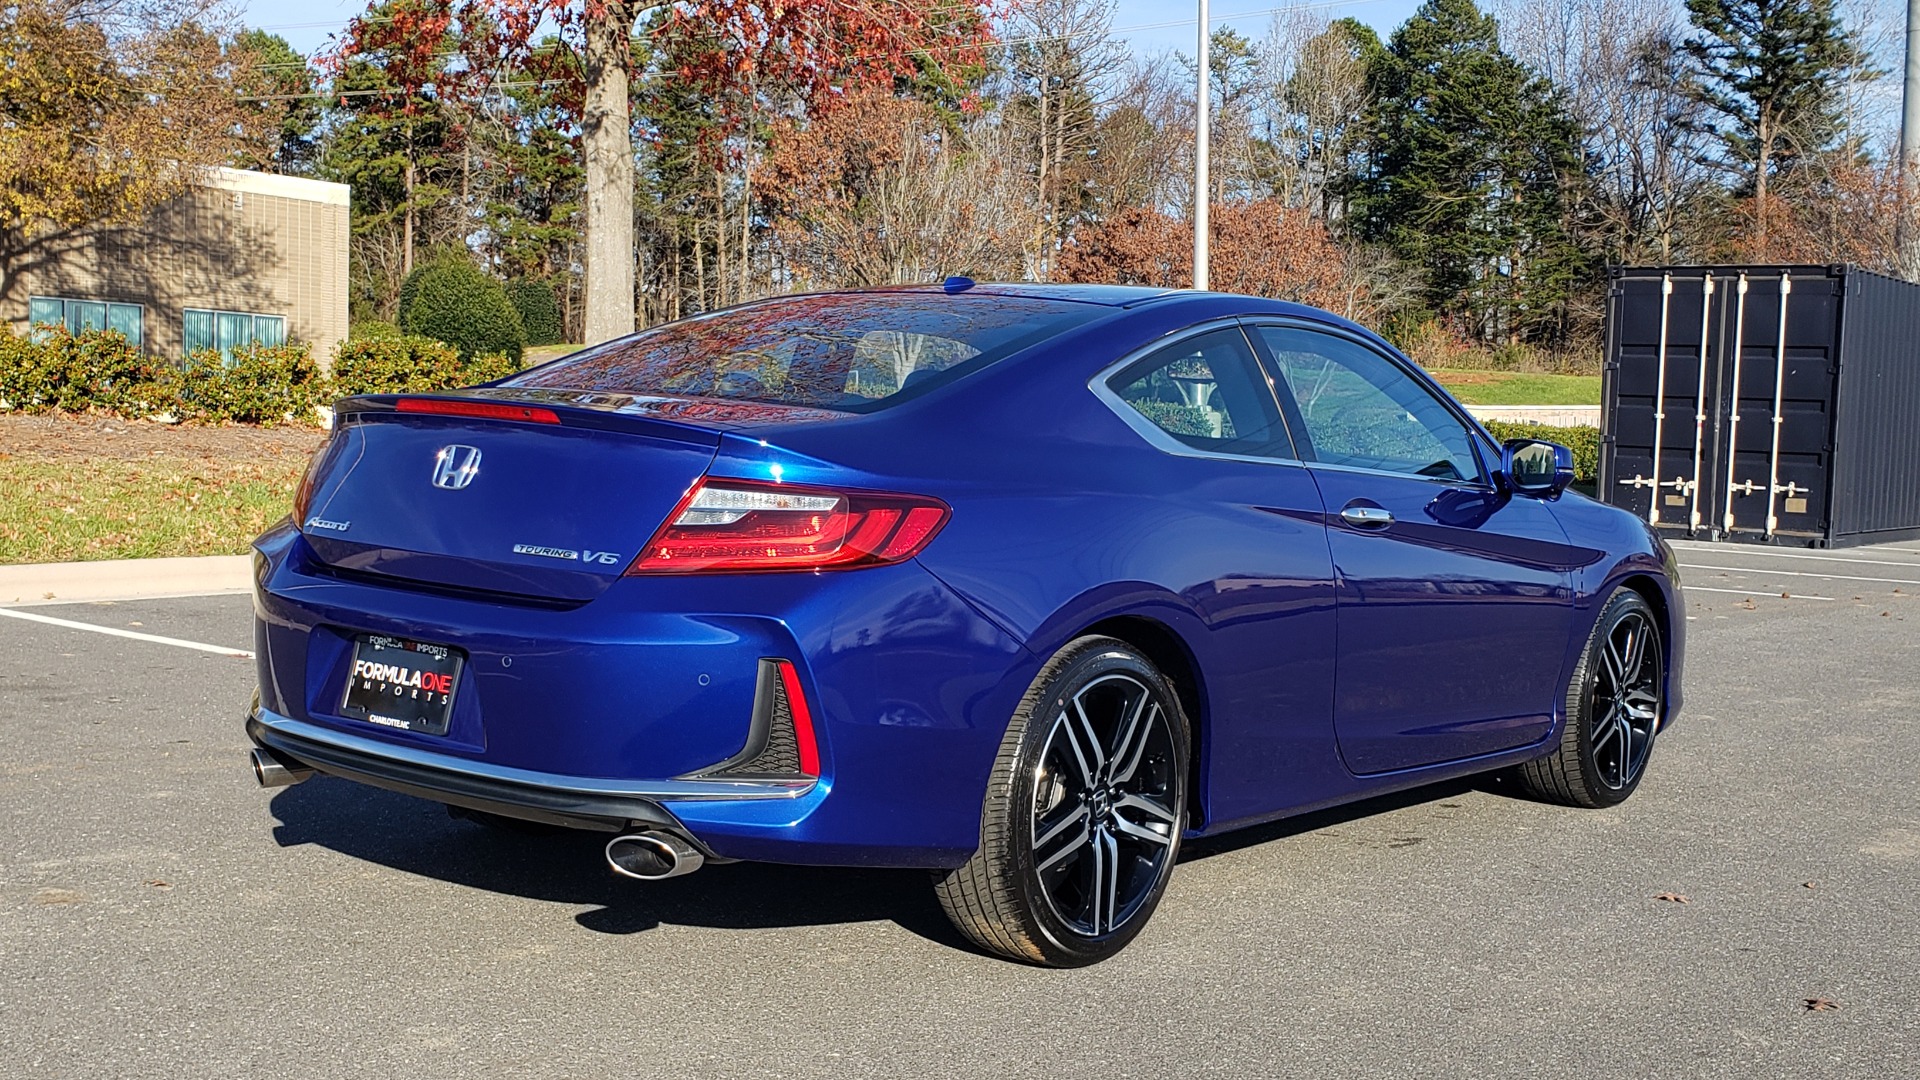 Used 2017 Honda ACCORD COUPE TOURING V6 / 2-DR / NAV / SUNROOF / LANEWATCH / CMBS for sale Sold at Formula Imports in Charlotte NC 28227 8